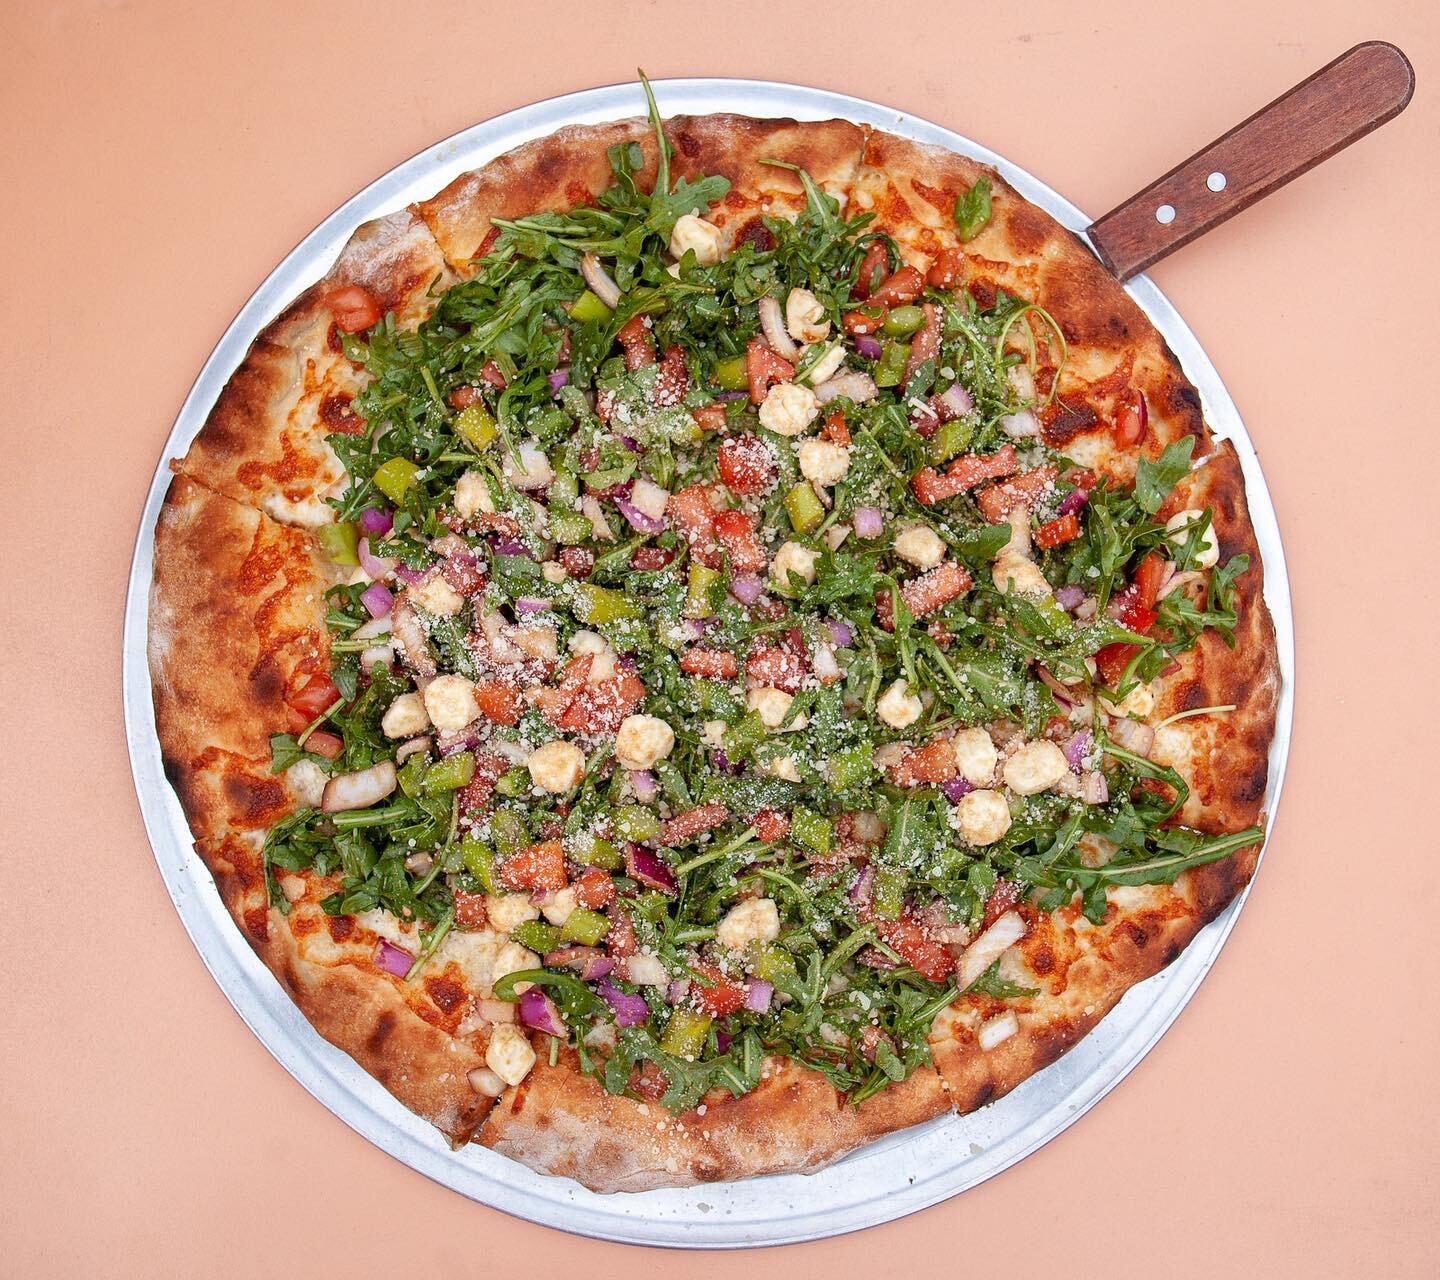 All garden fresh toppings on this pie😍 
Diced tomatoes, fresh mozzarella, onions, asparagus, and last but not least, arugula 🍅🌿 try out a medium or large, 𝘪𝘧 𝘺𝘰𝘶&rsquo;𝘳𝘦 𝘧𝘦𝘦𝘭𝘪𝘯&rsquo; 𝘪𝘵, tonight until 10pm!

📍2nd Floor @thepamark